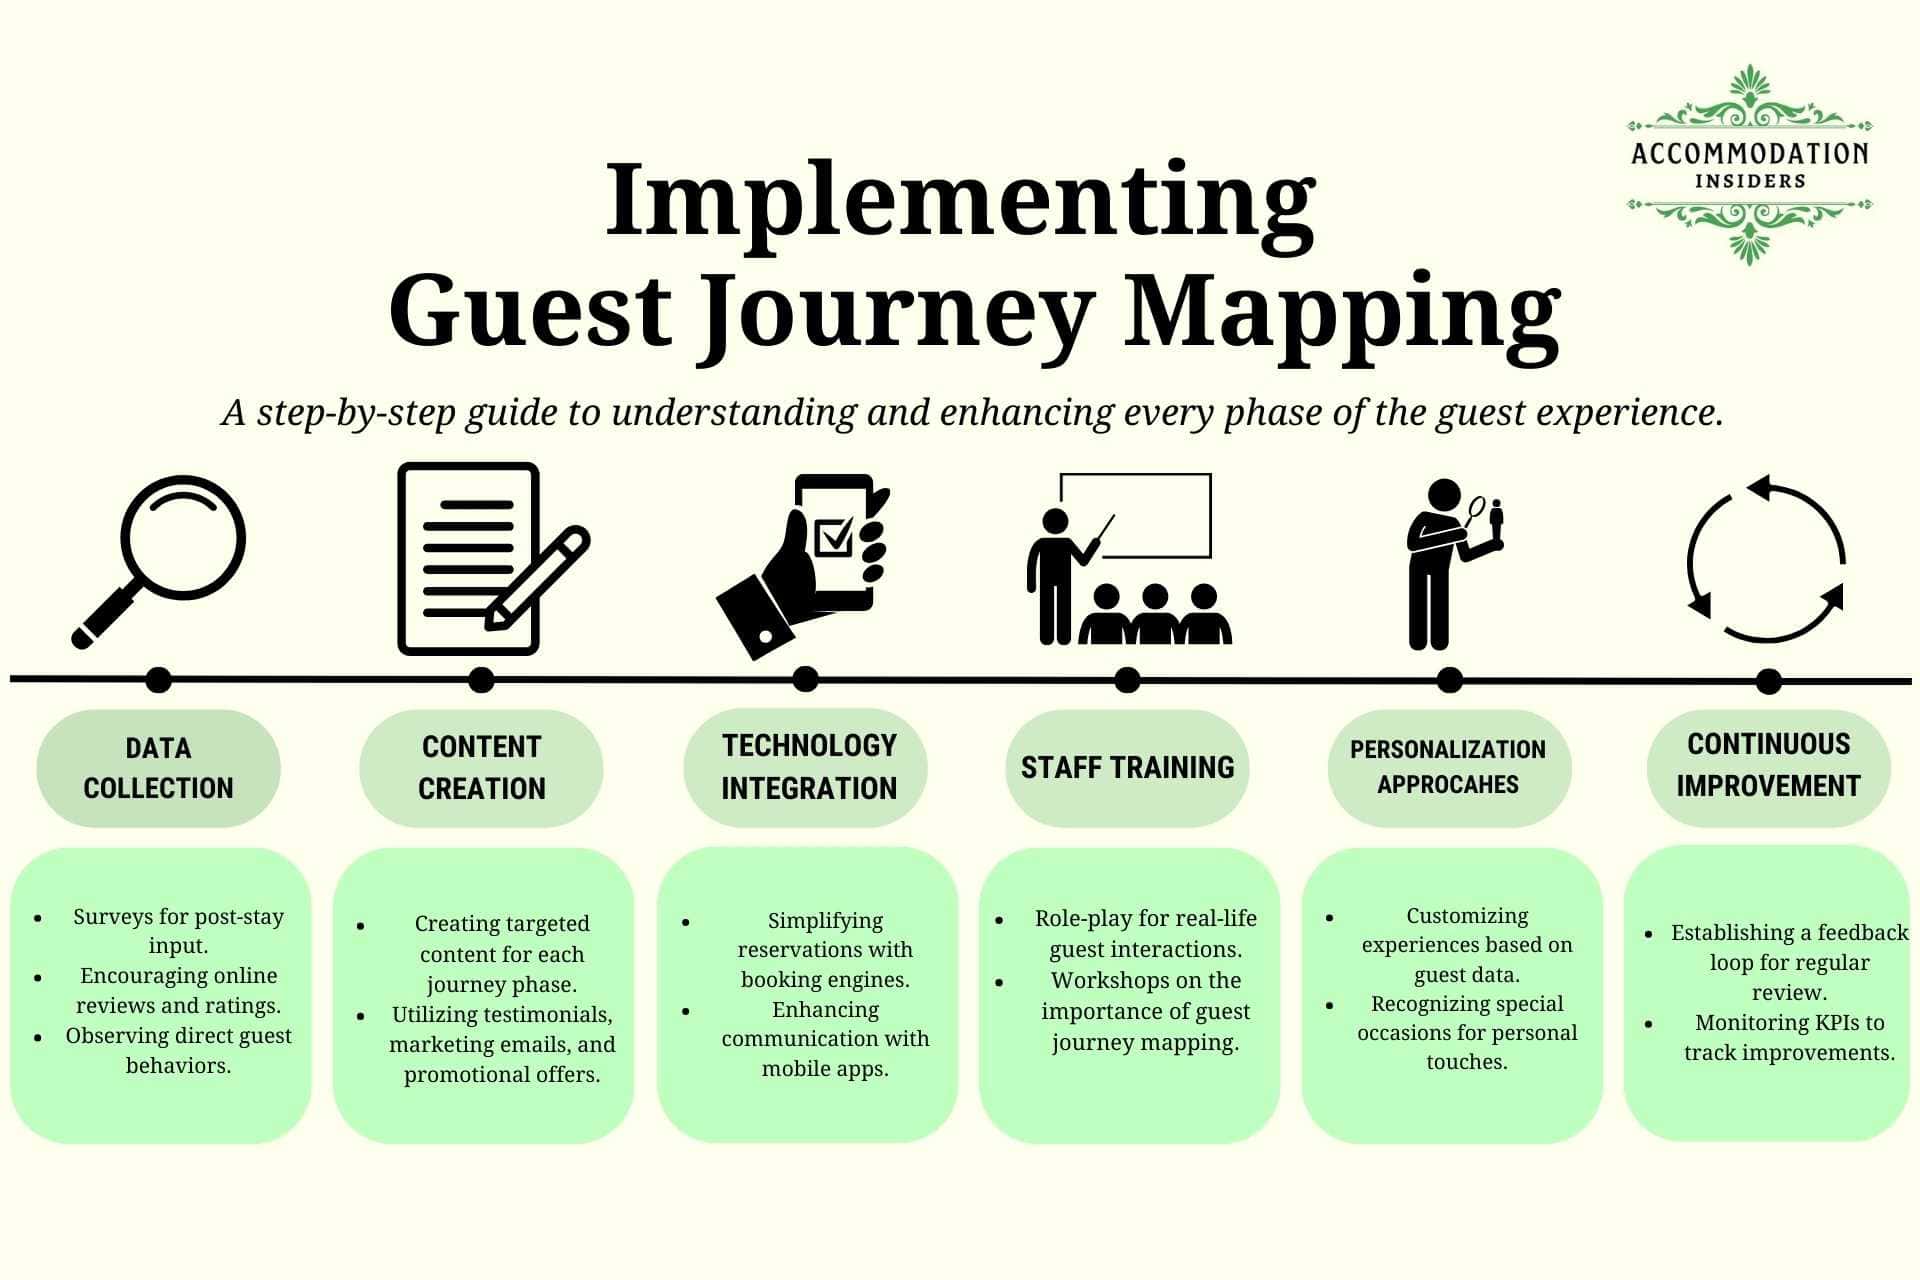 Infographic titled 'Implementing Guest Journey Mapping' by Accommodation Insiders, outlining steps like Data Collection, Content Creation, Technology Integration, Staff Training, Personalization Approaches, and Continuous Improvement to enhance every phase of the guest experience.